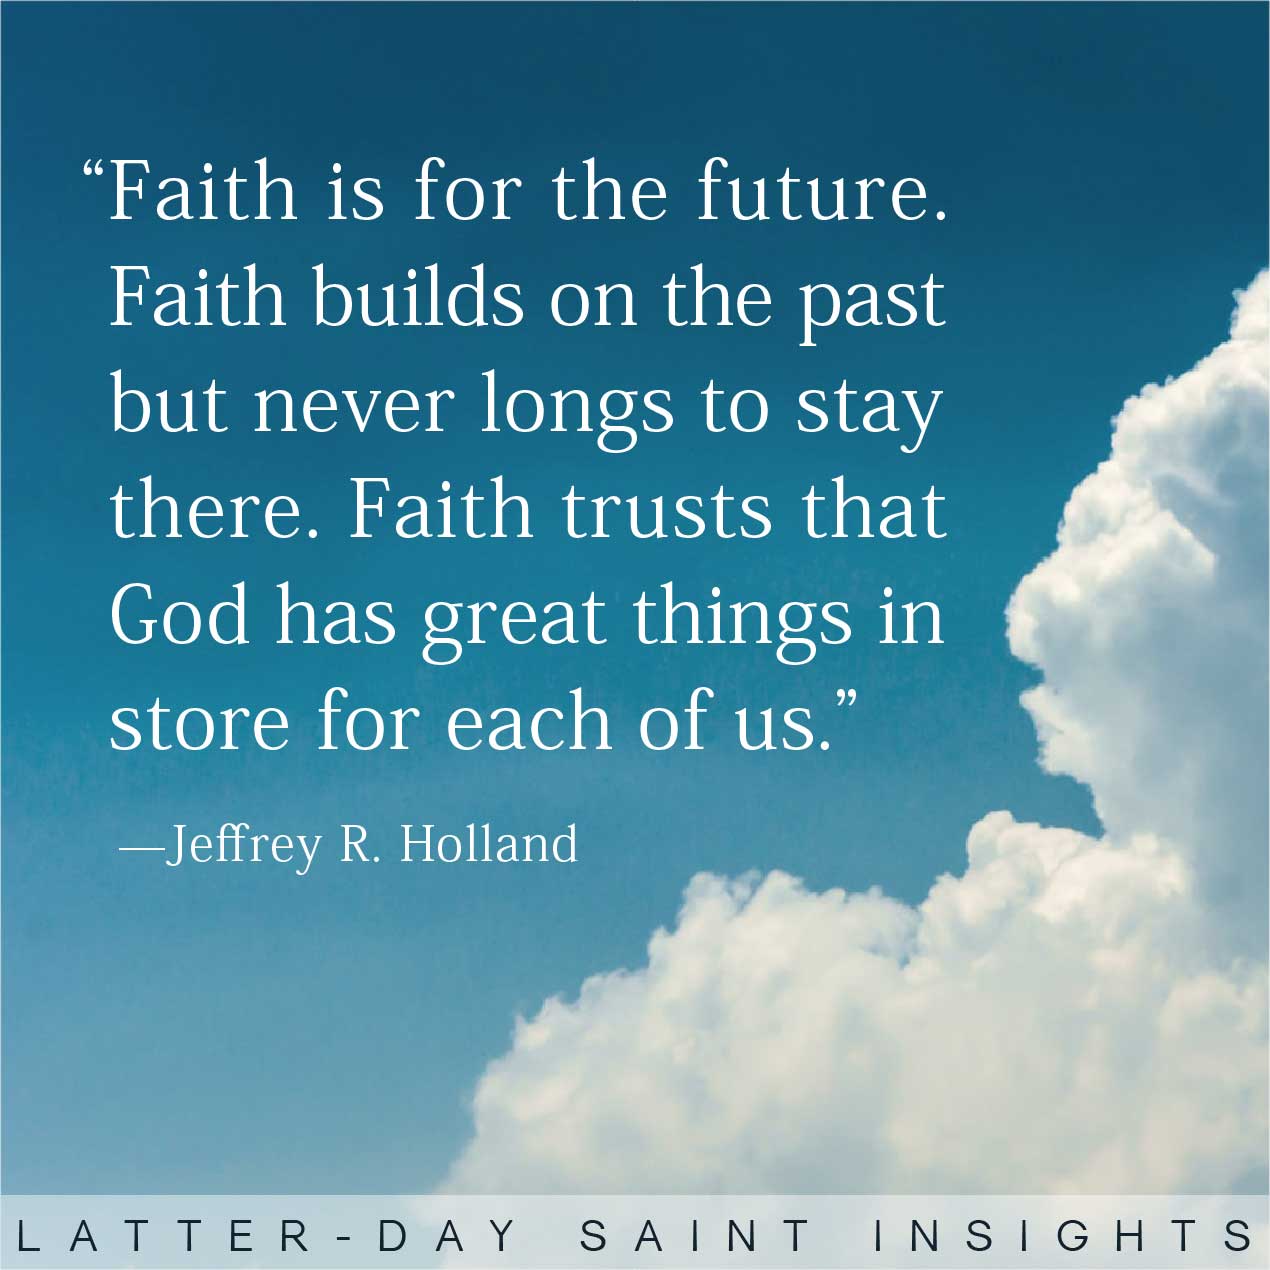 "Faith is for the future. Faith Builds on the past but never longs to stay there. Faith Trusts that God has great things in store of each of us." By Jeffery R. Holland